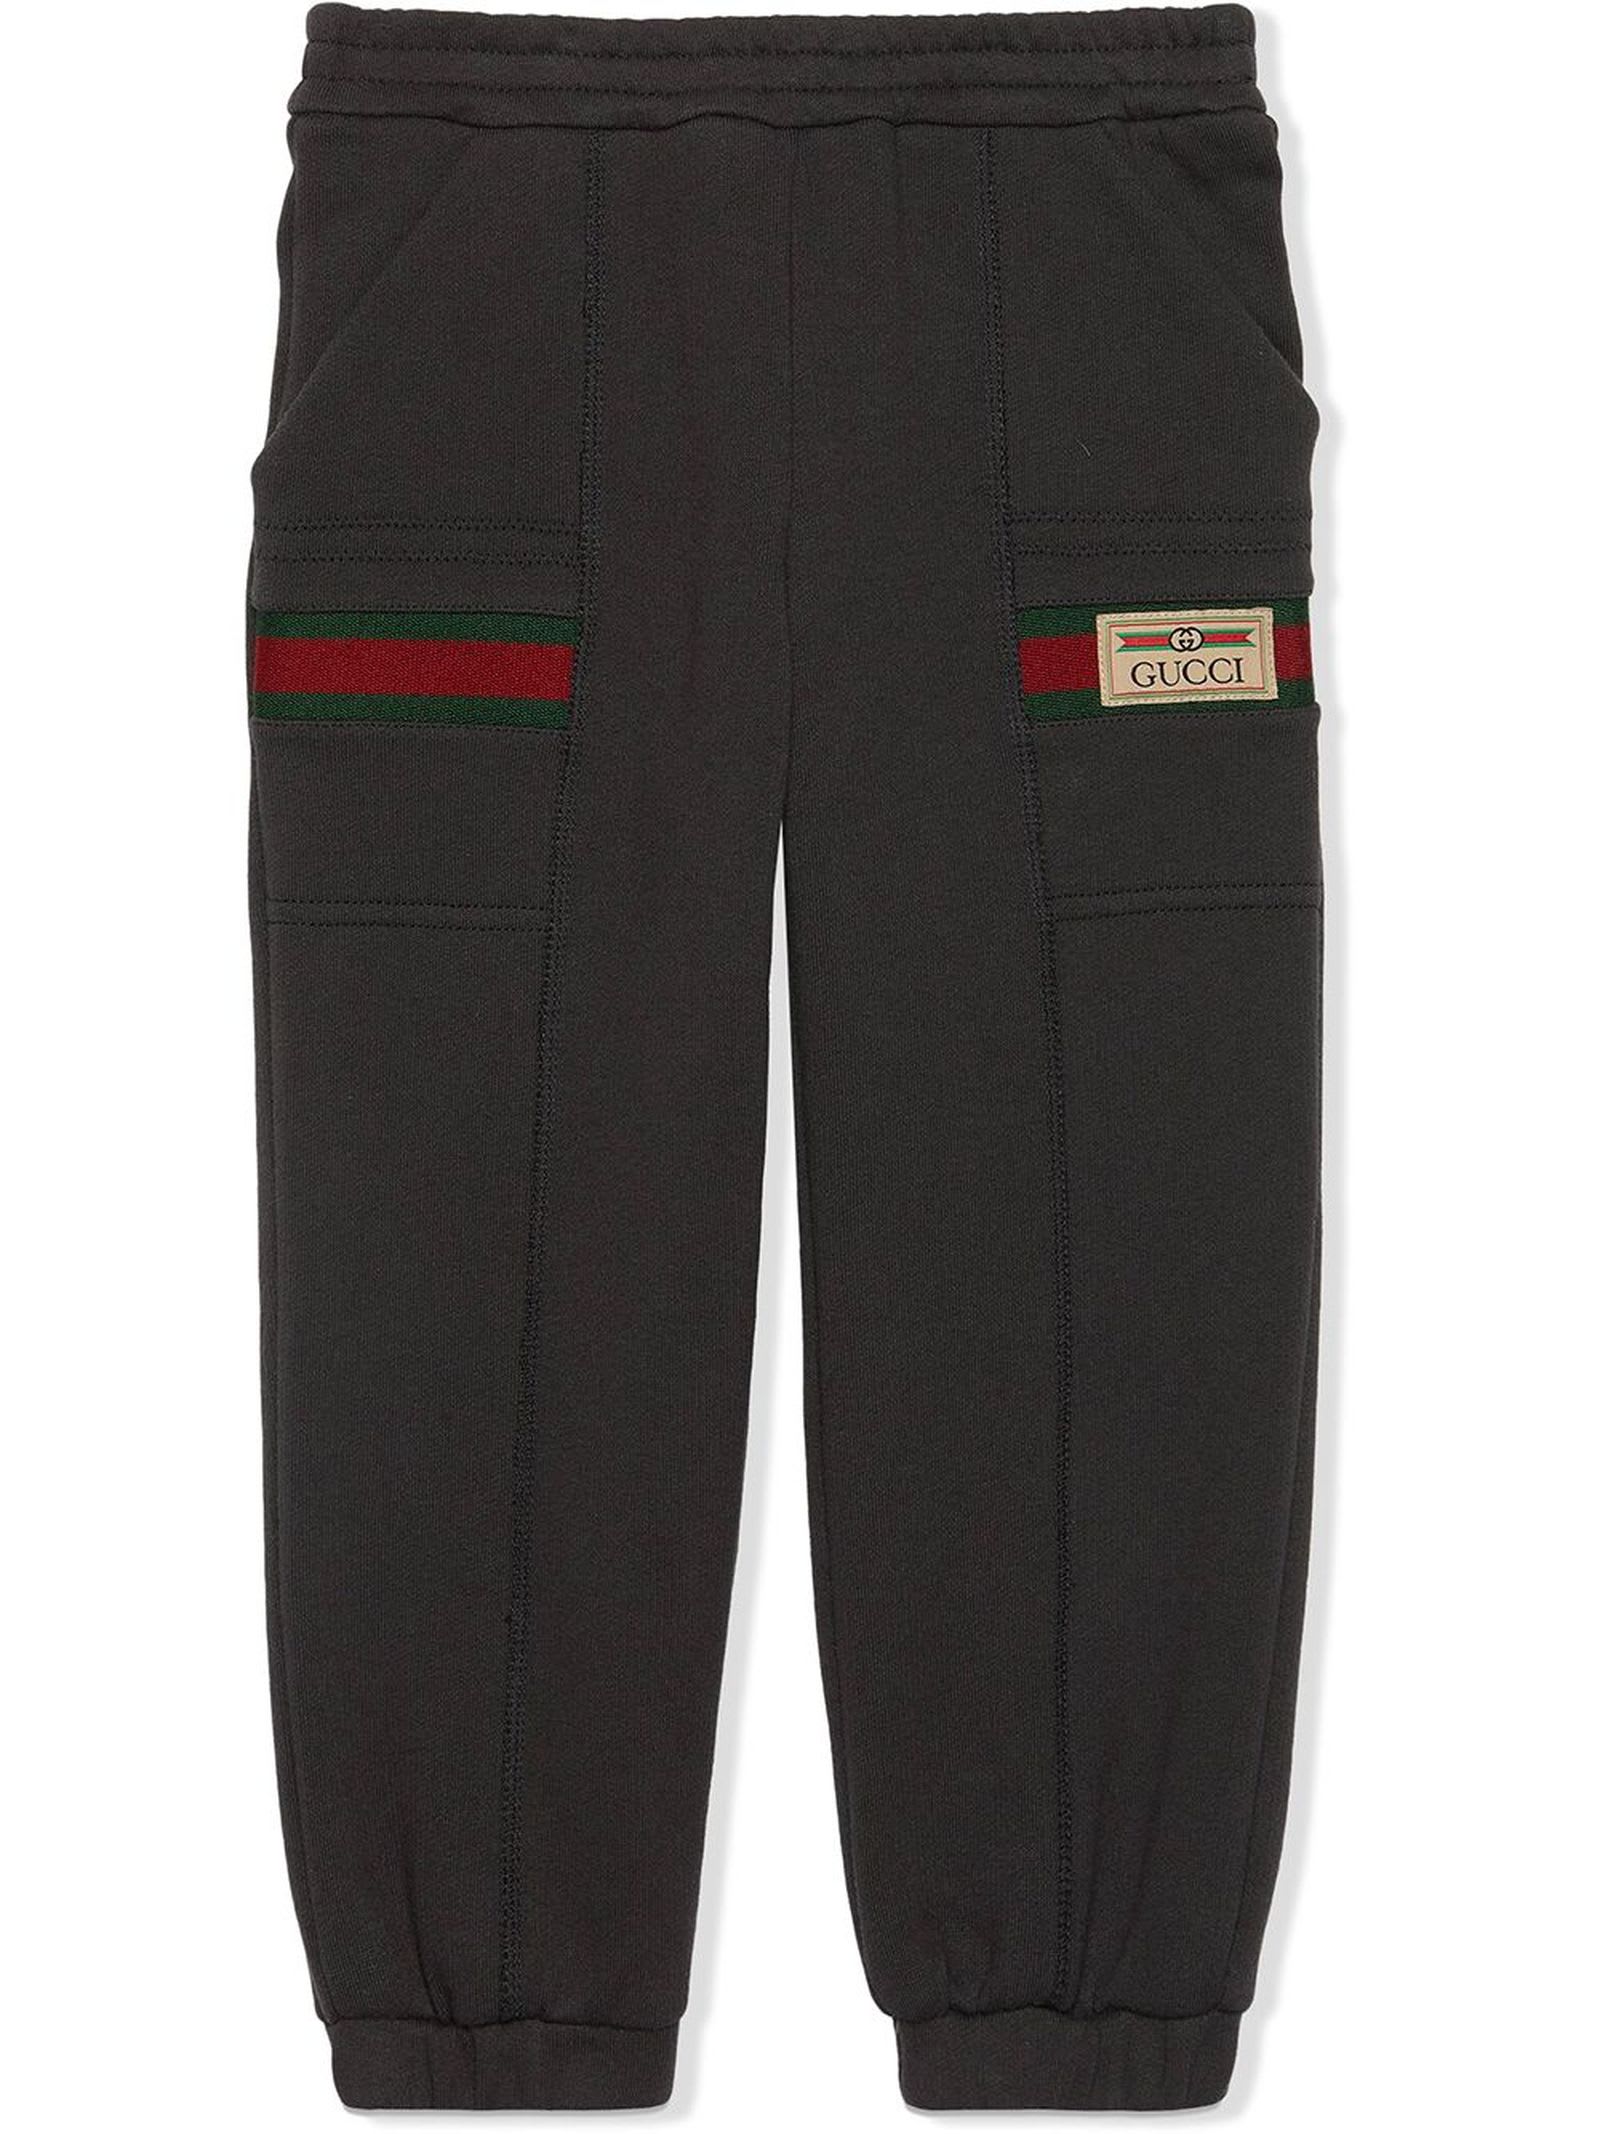 GUCCI CHILDRENS JOGGING TROUSERS,653667XJDKAK 1073